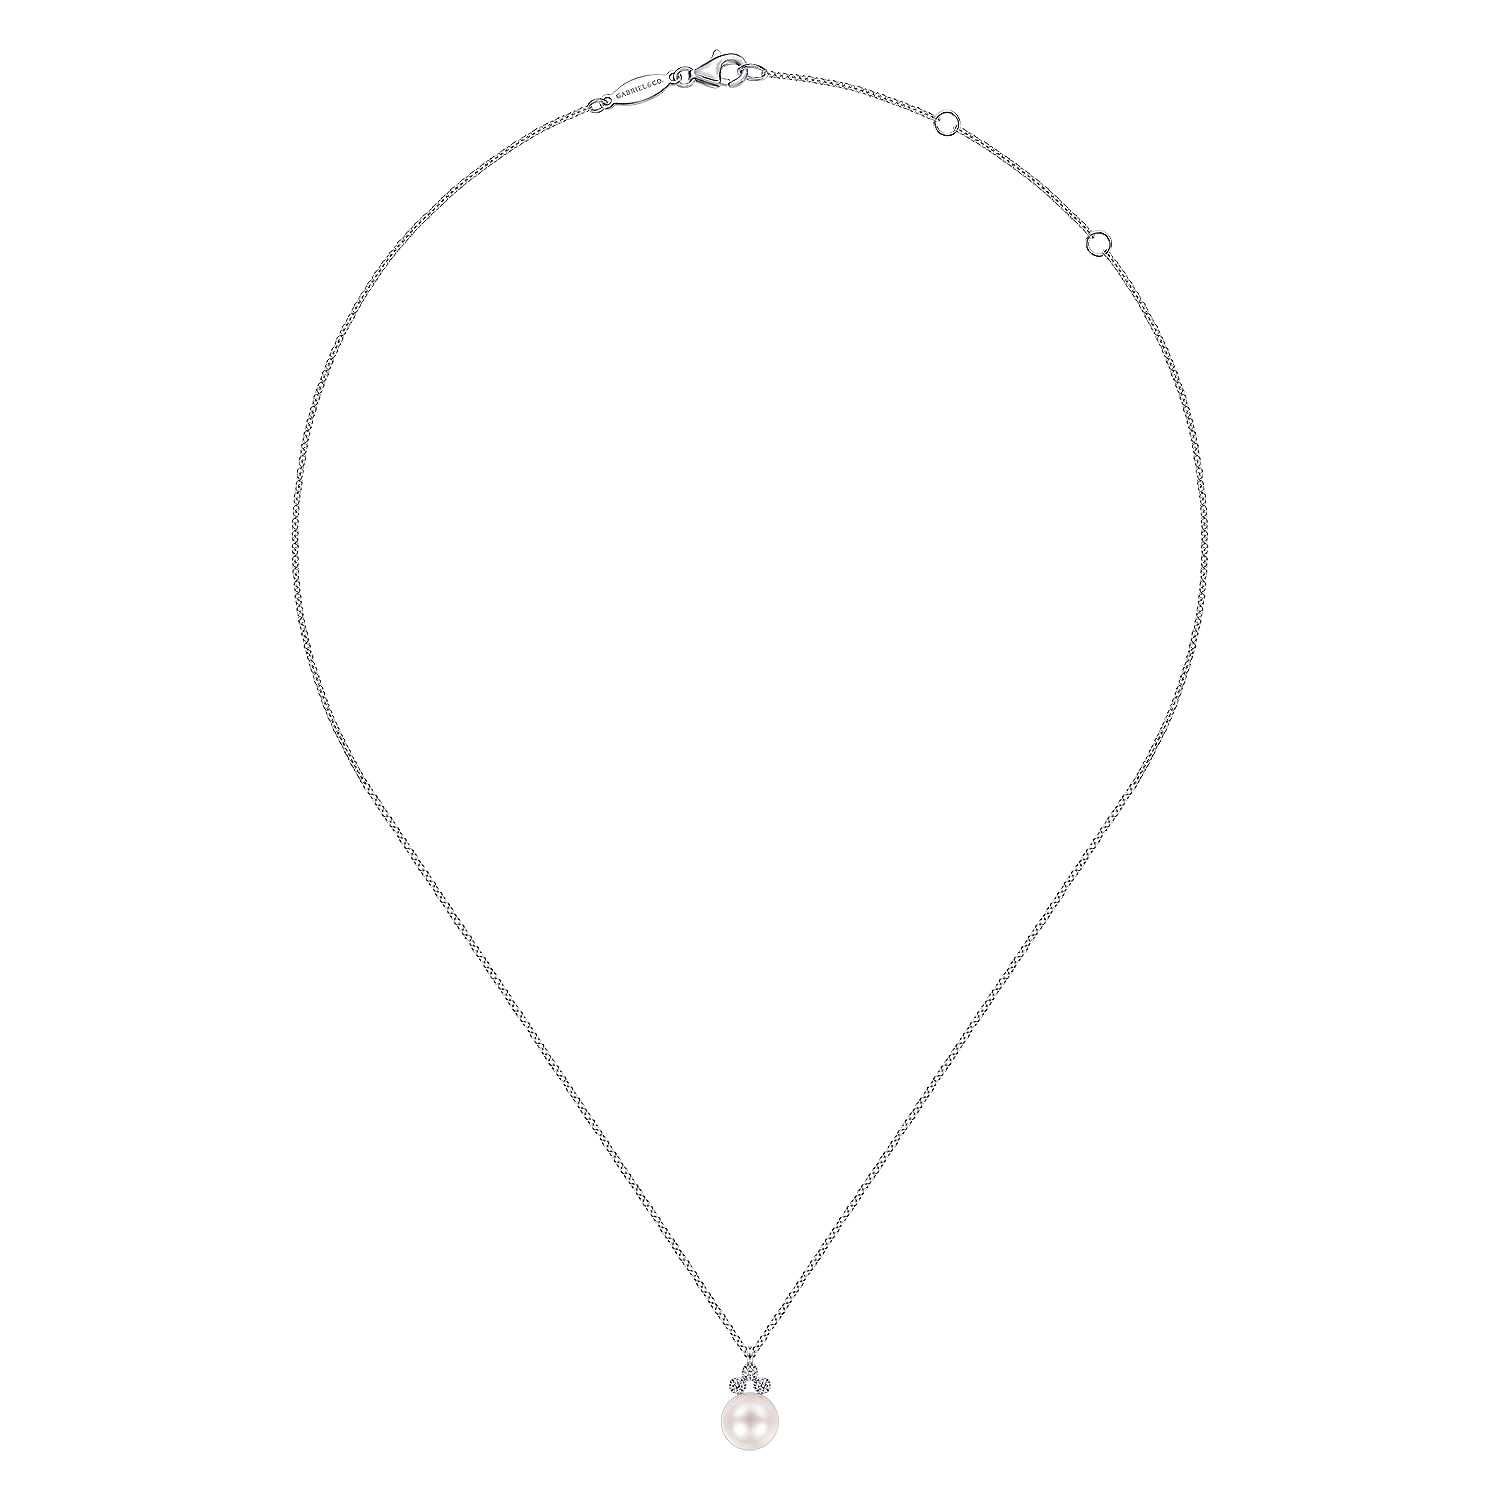 14K White Gold Diamond and Pearl Pendant Necklace